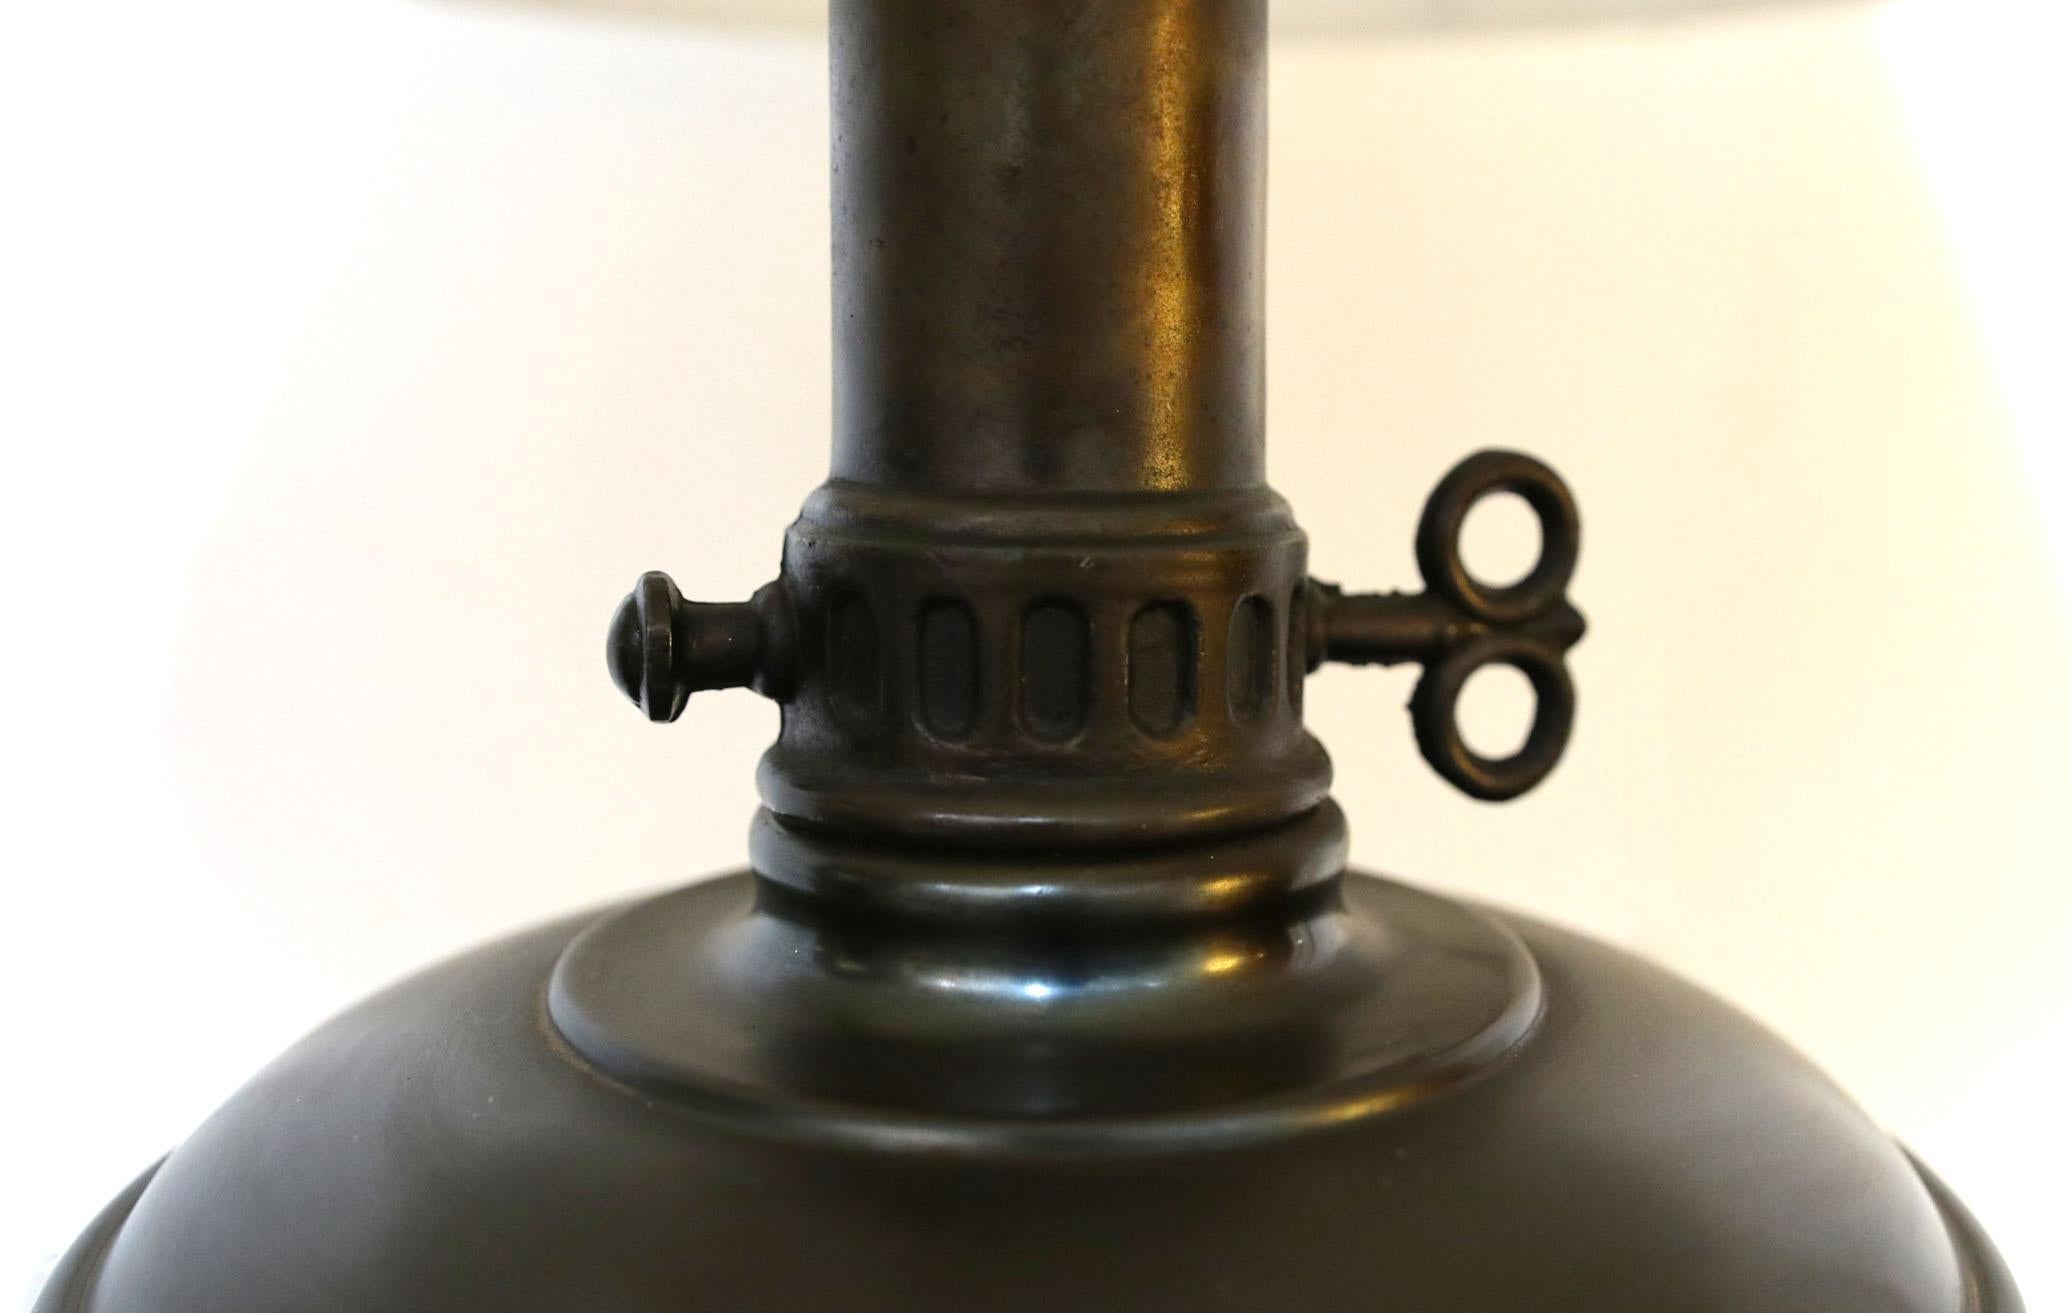 The design and details of this converted lamp make it a standout. It is a neoclassical style brass, bronze and porcelain lamp that is elegant and traditional.  The top part of the lamp is brass while the base is likely bronze. This appears to have